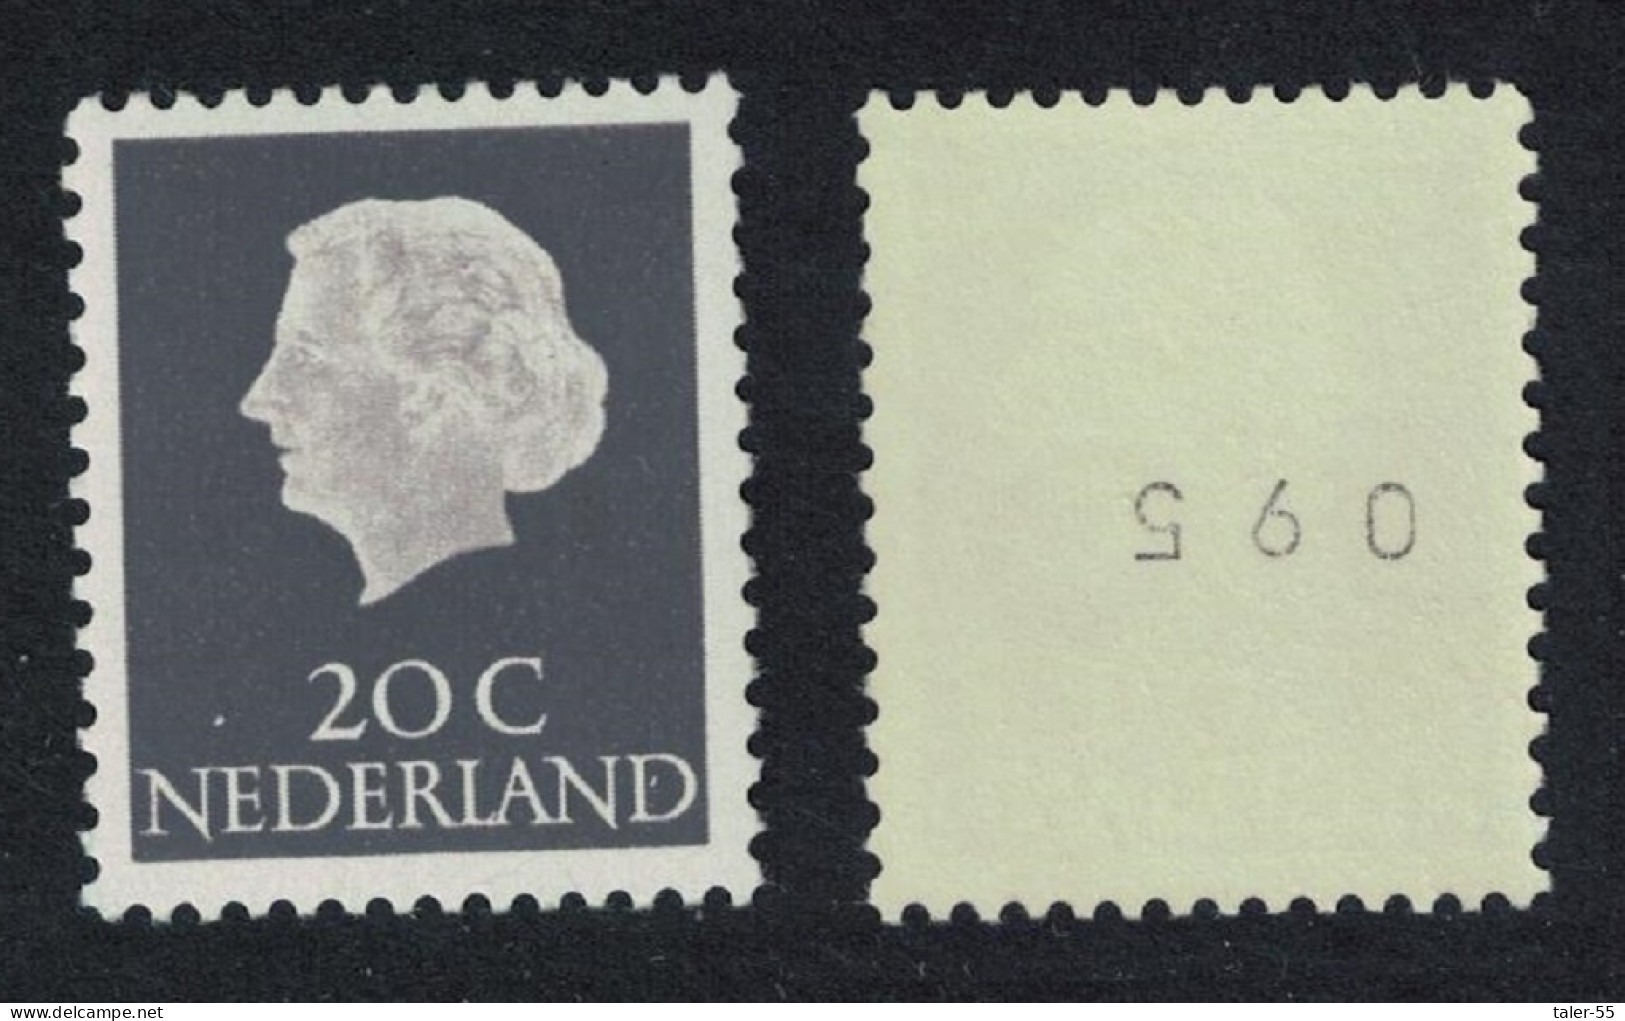 Netherlands Queen Juliana 20c Roll Stamp Control Number 1966 MNH SG#778 - Unused Stamps